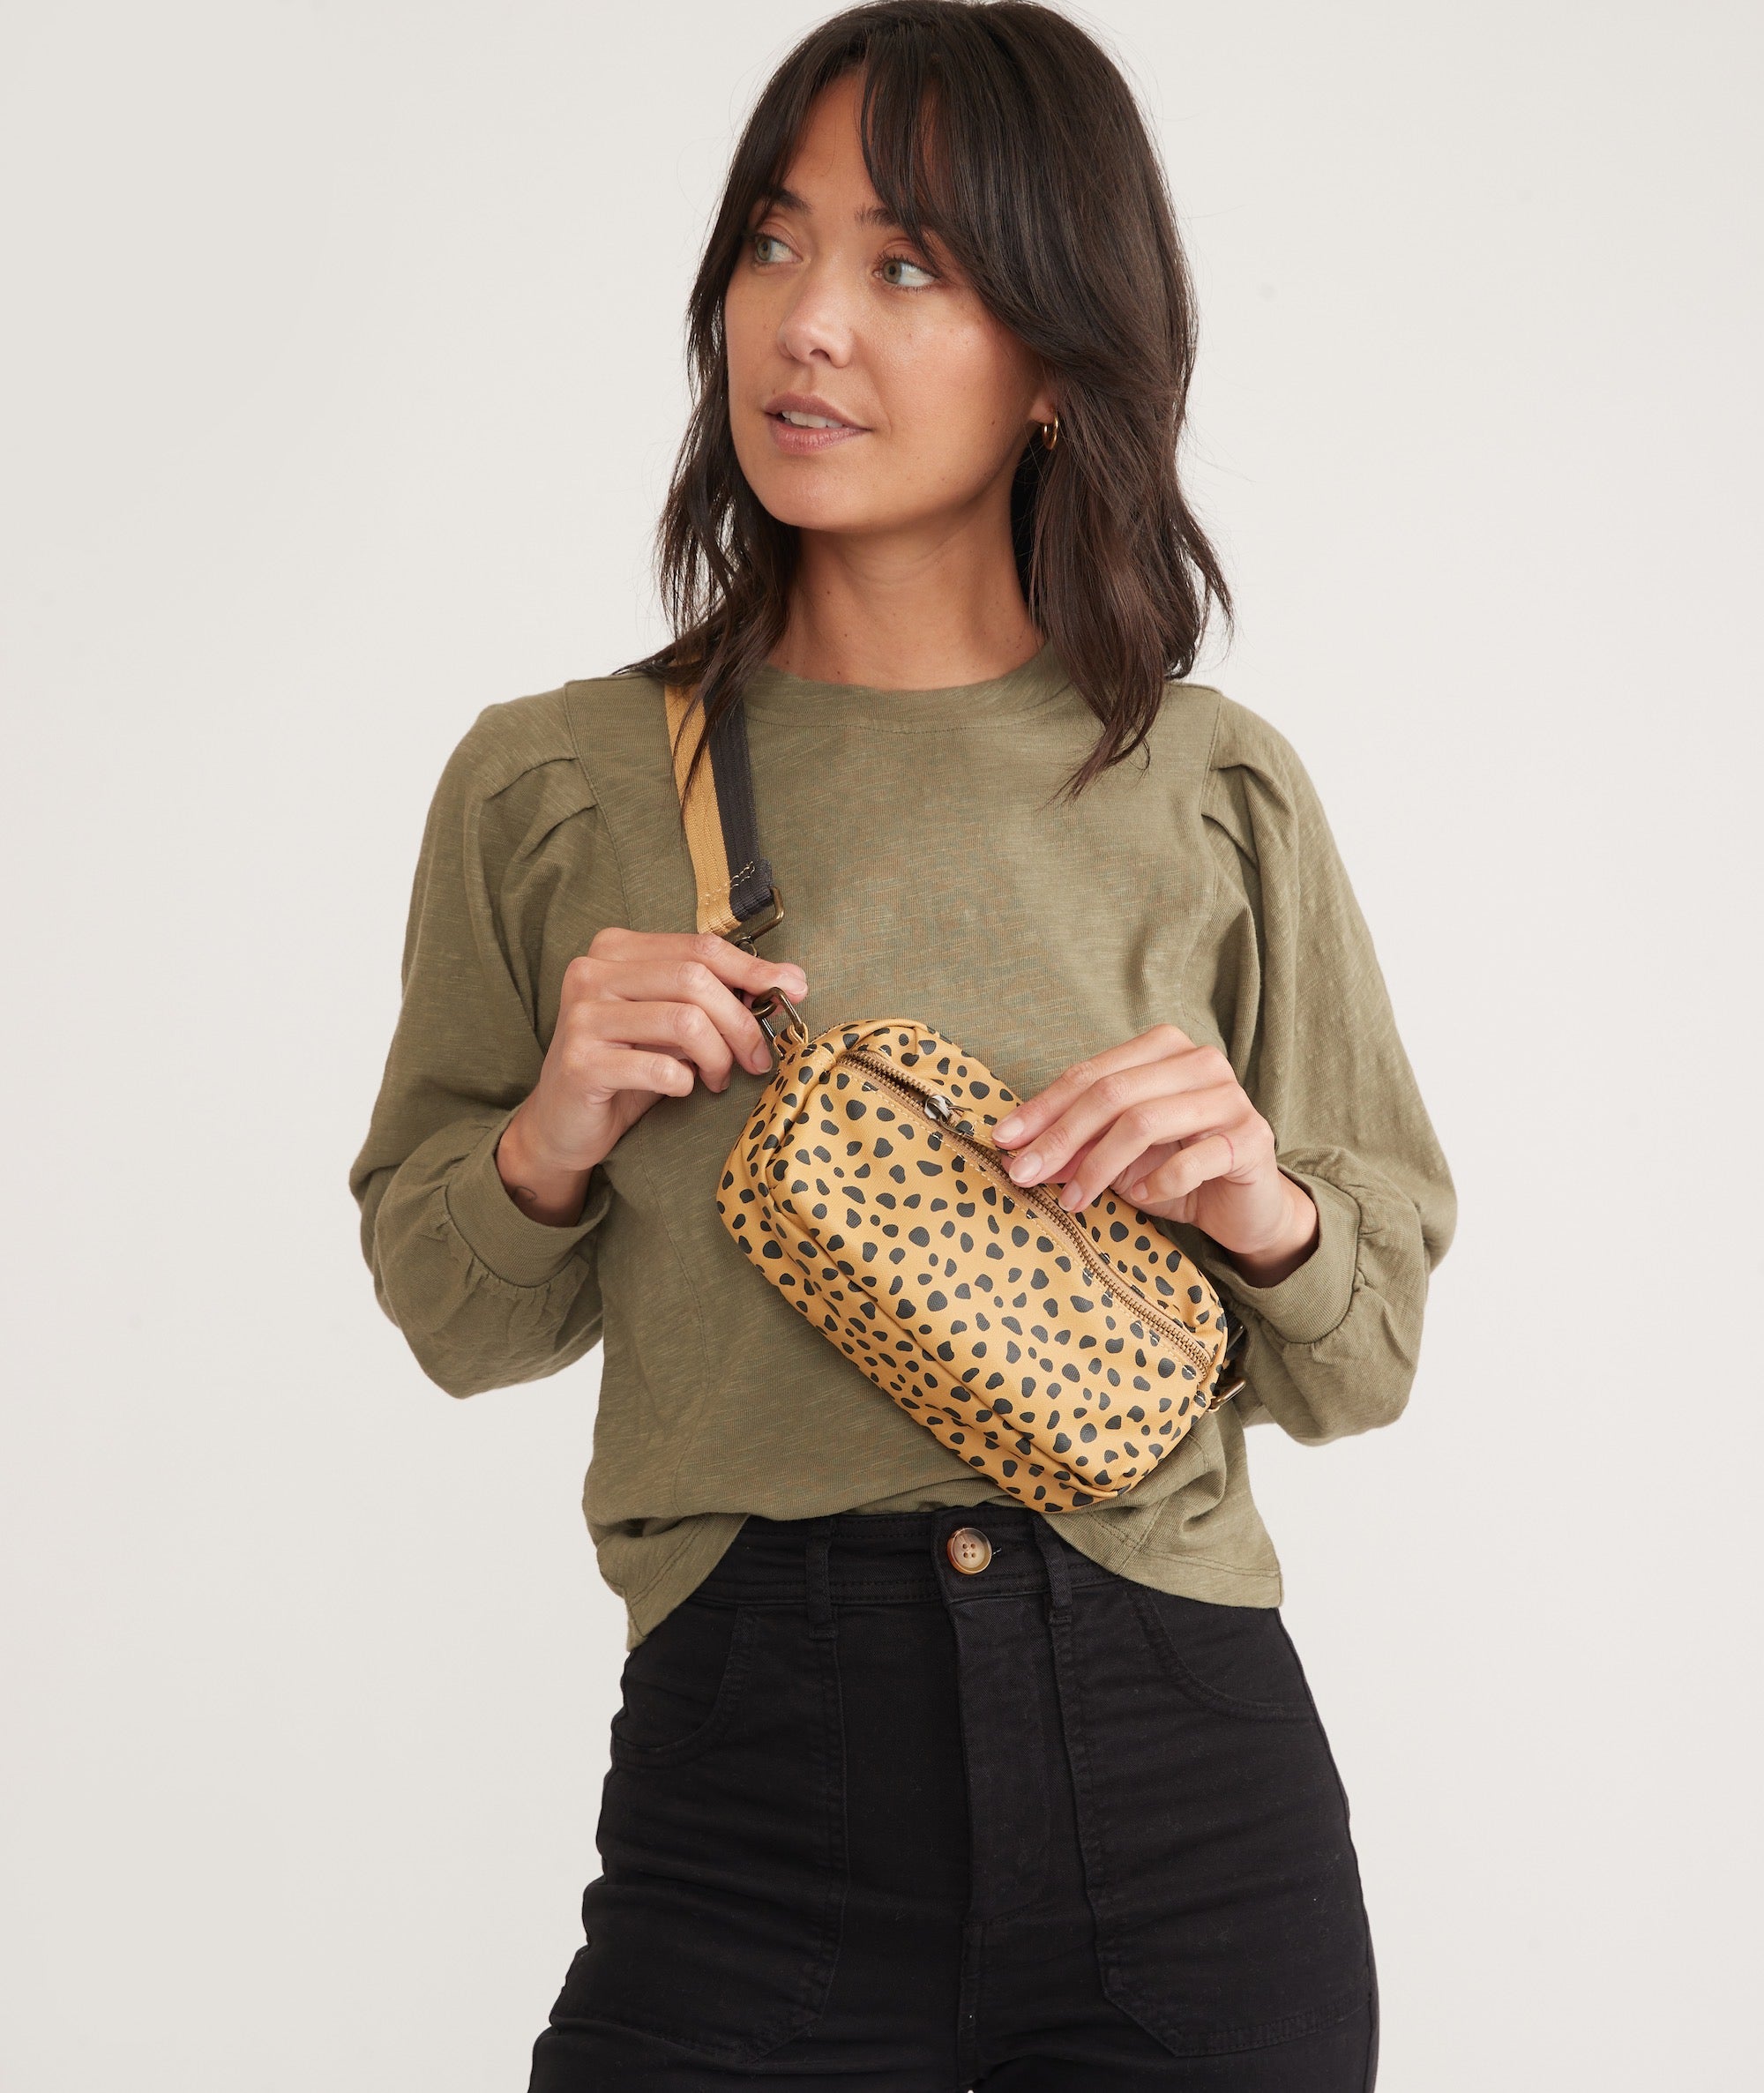 Cheetah Fanny Pack  Leopard Fanny Pack – Polly and Crackers